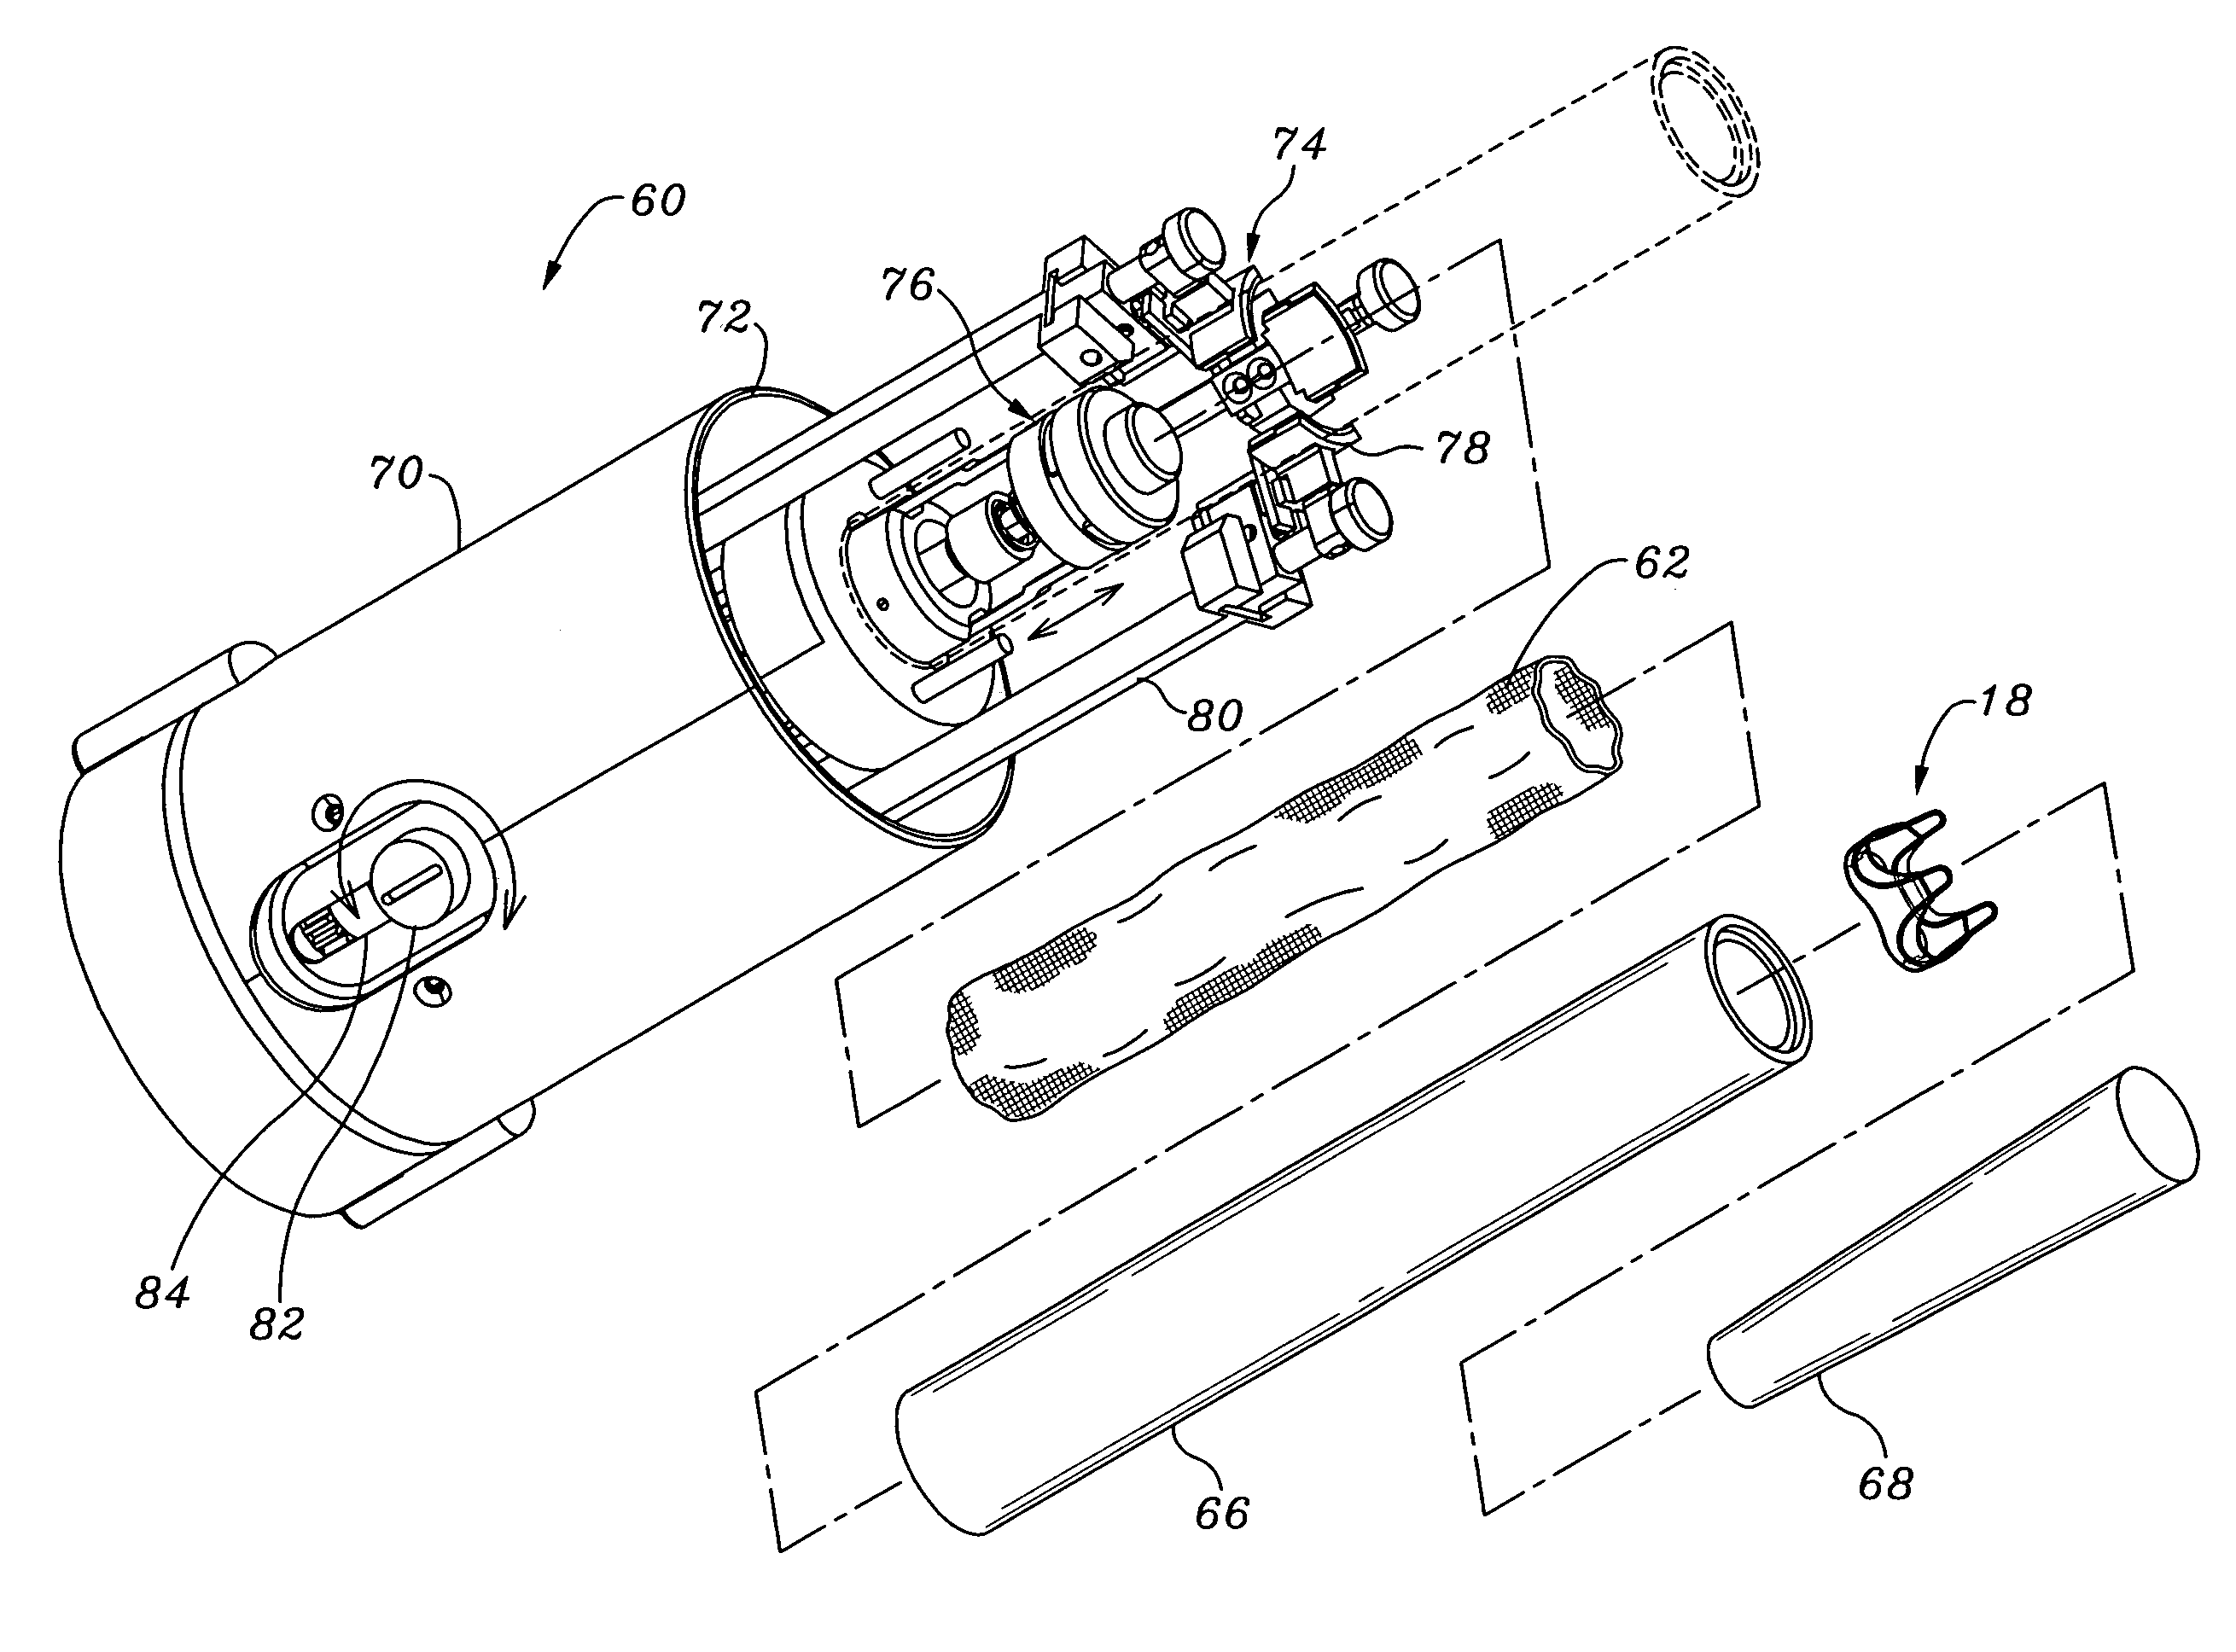 Systems and methods for assembling components of a fabric-covered prosthetic heart valve